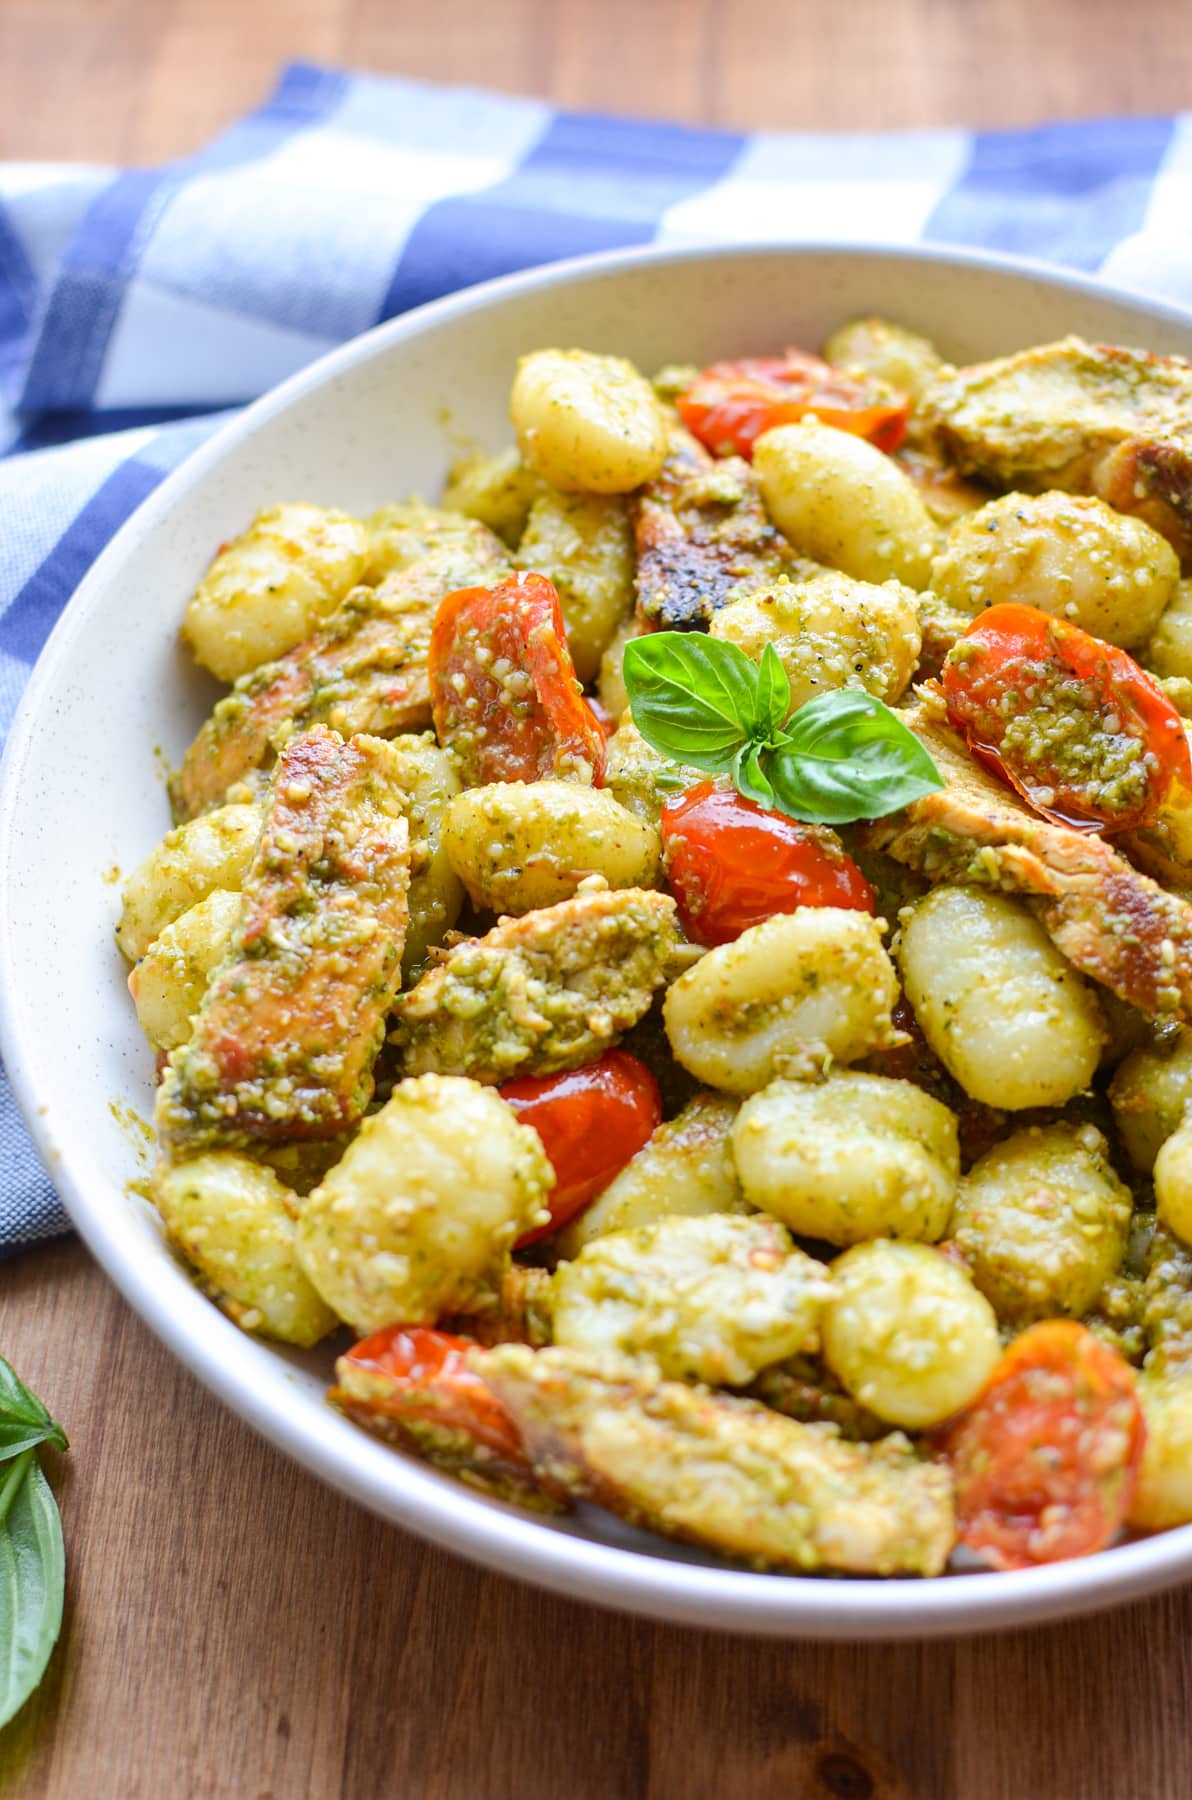 A bowl of gnocchi tossed with pesto and garnished with fresh basil.